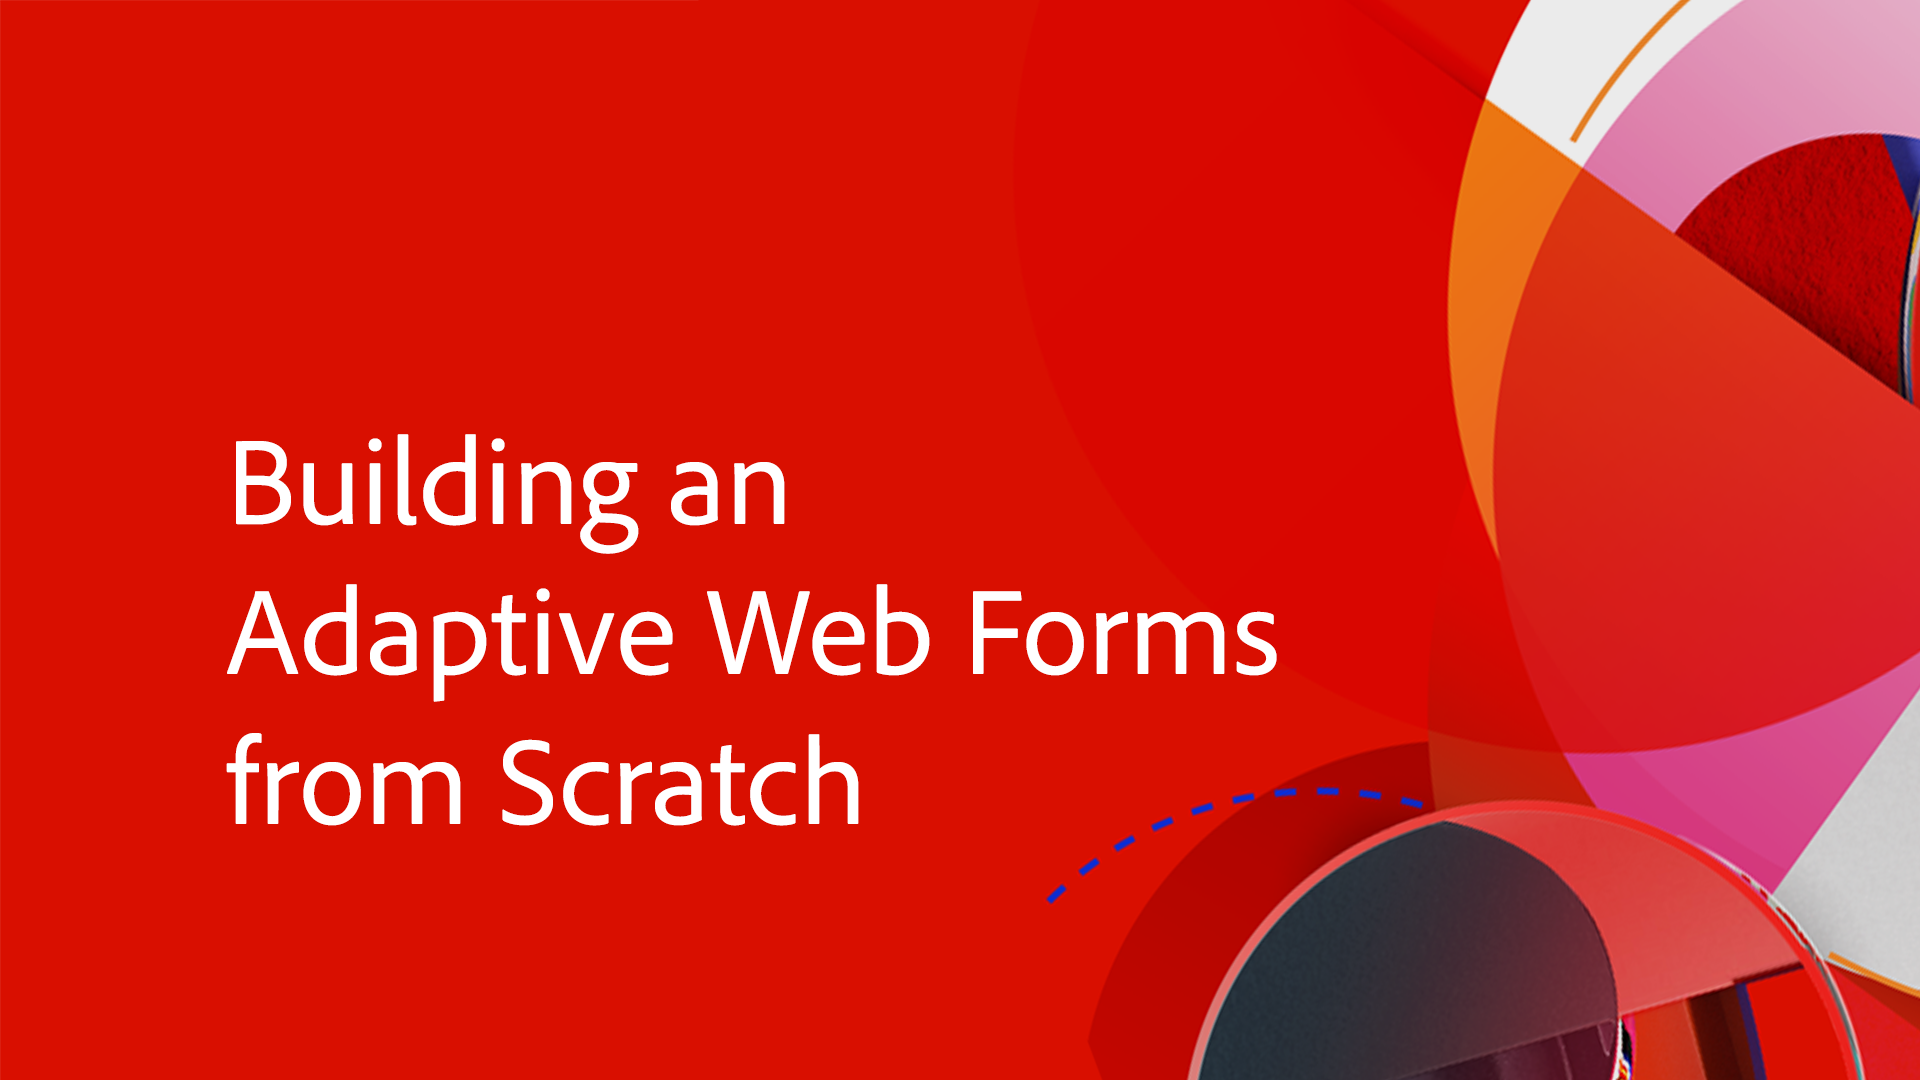 Building an Adaptive Web Forms from Scratch